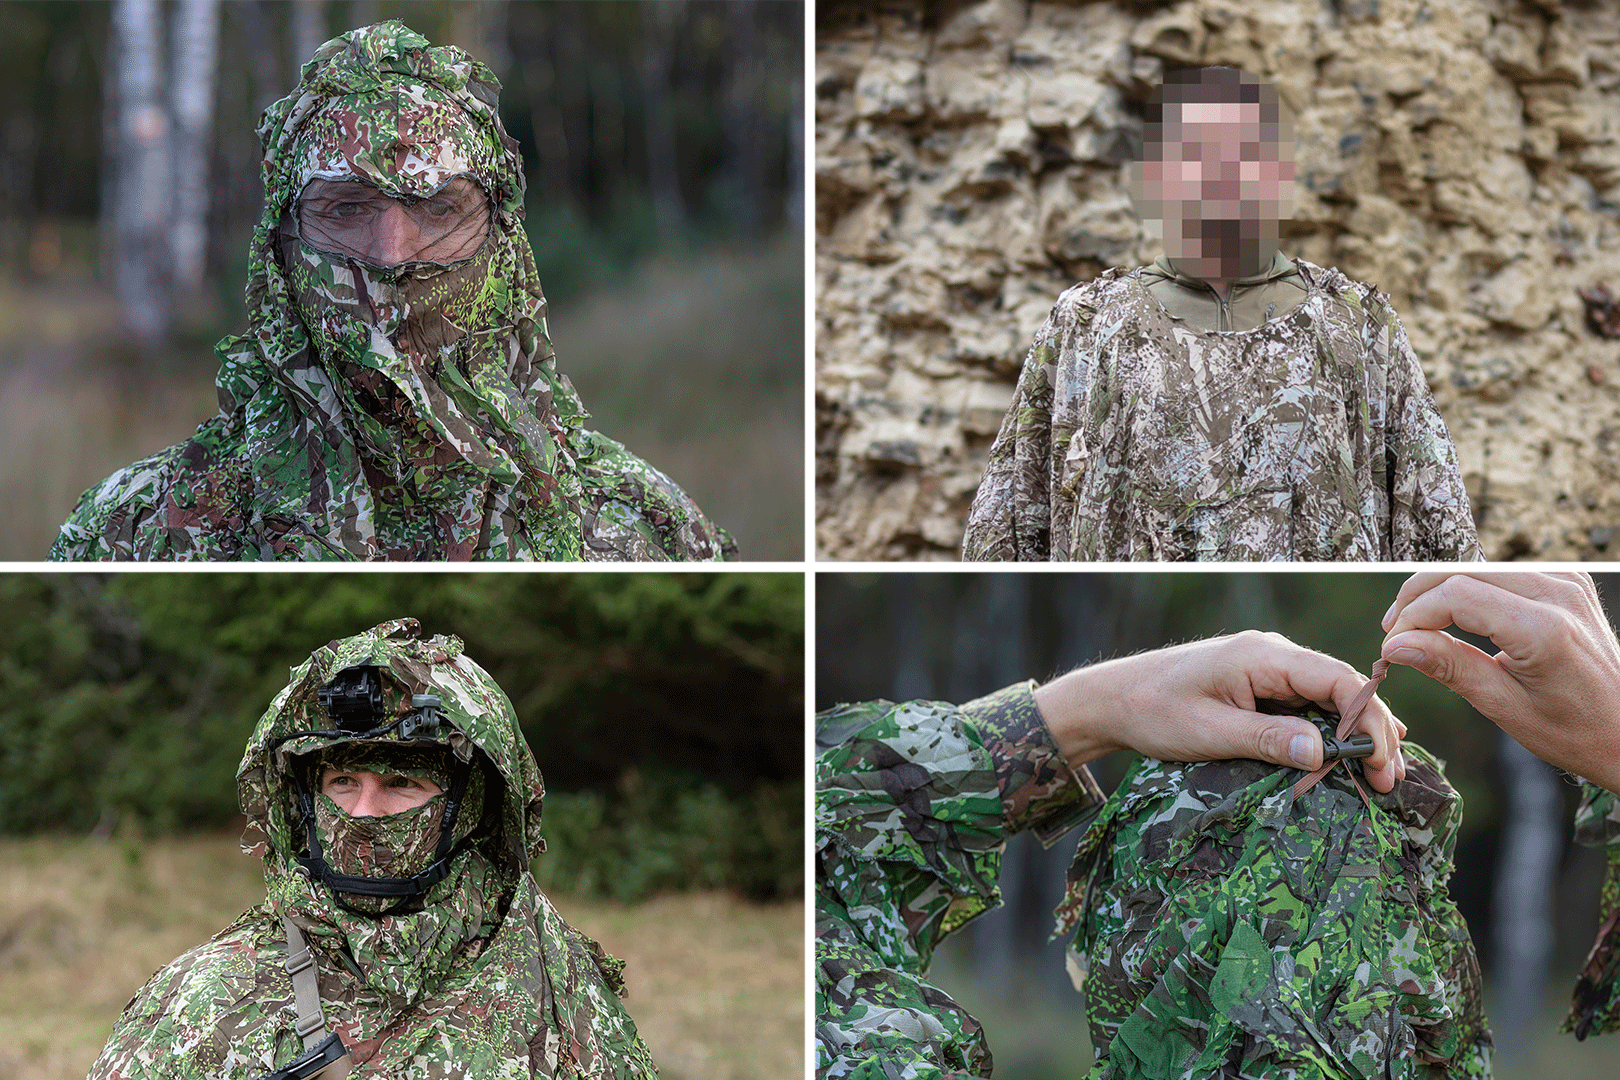 Ghost-Hoodie - Lightweight camo poncho / ghillie suit with